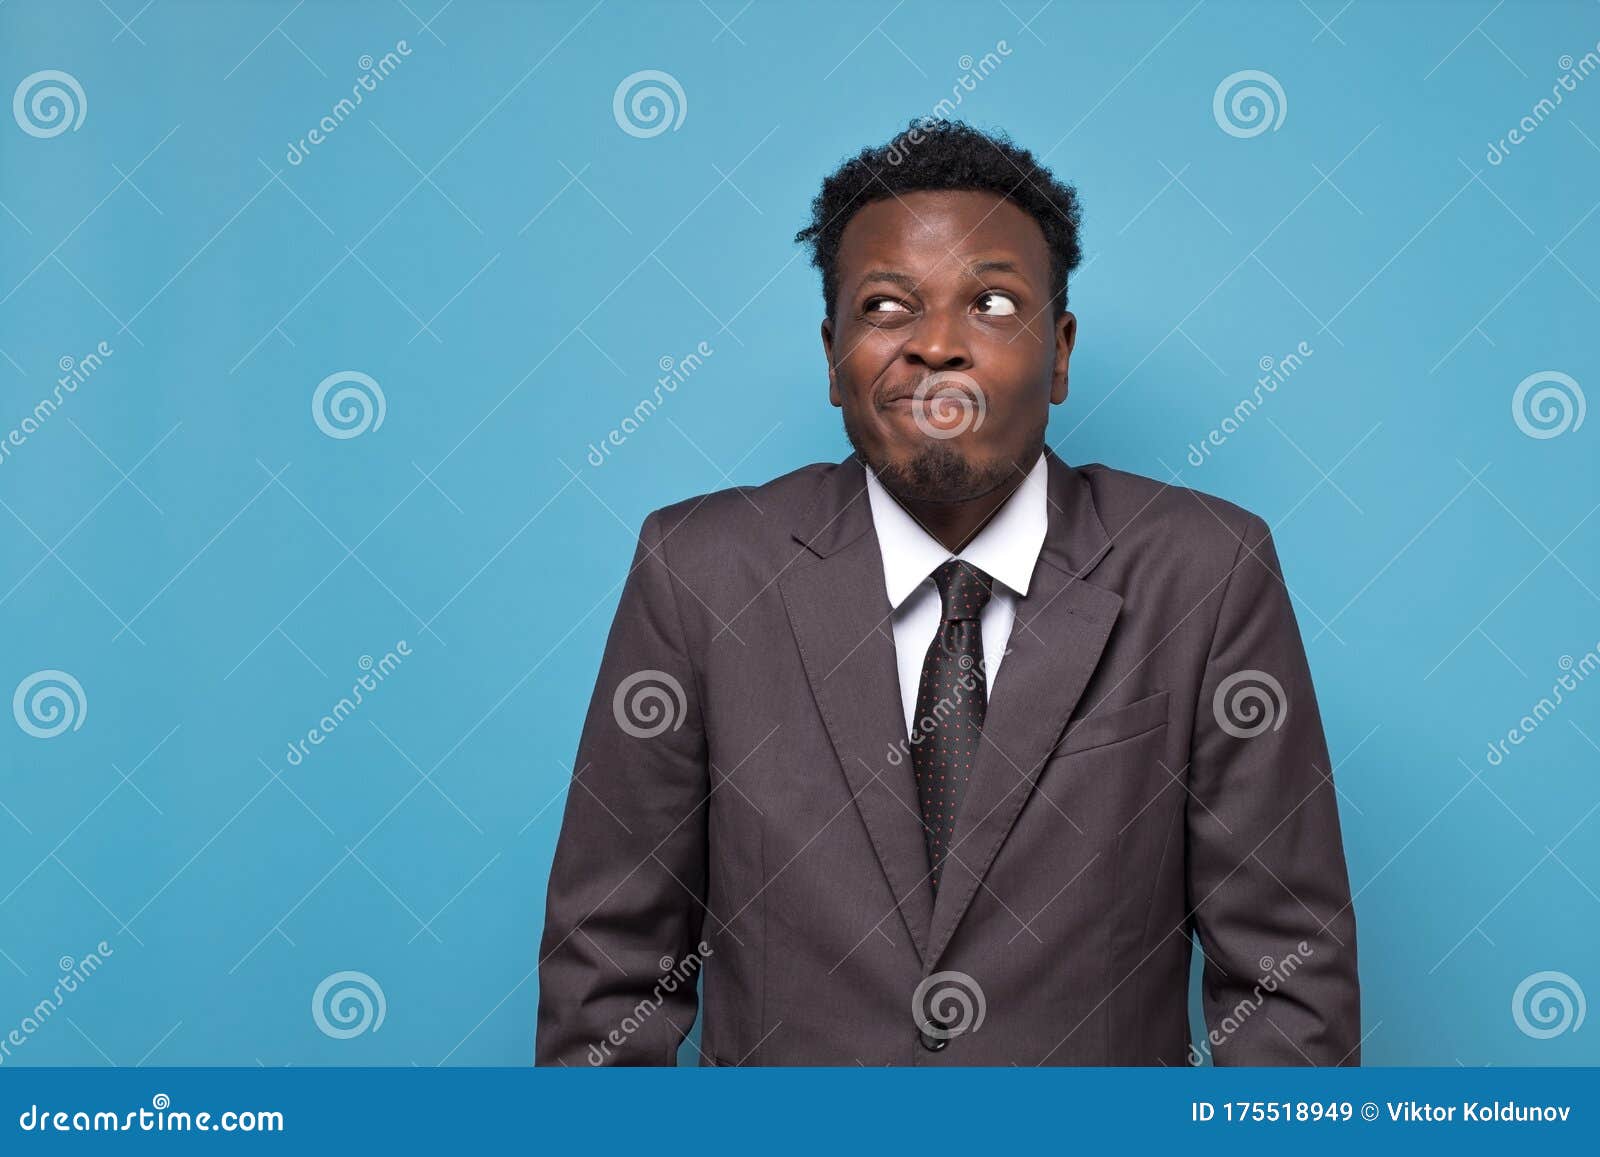 African American Businessman in Suit Looking Doubtful Having No Answer ...